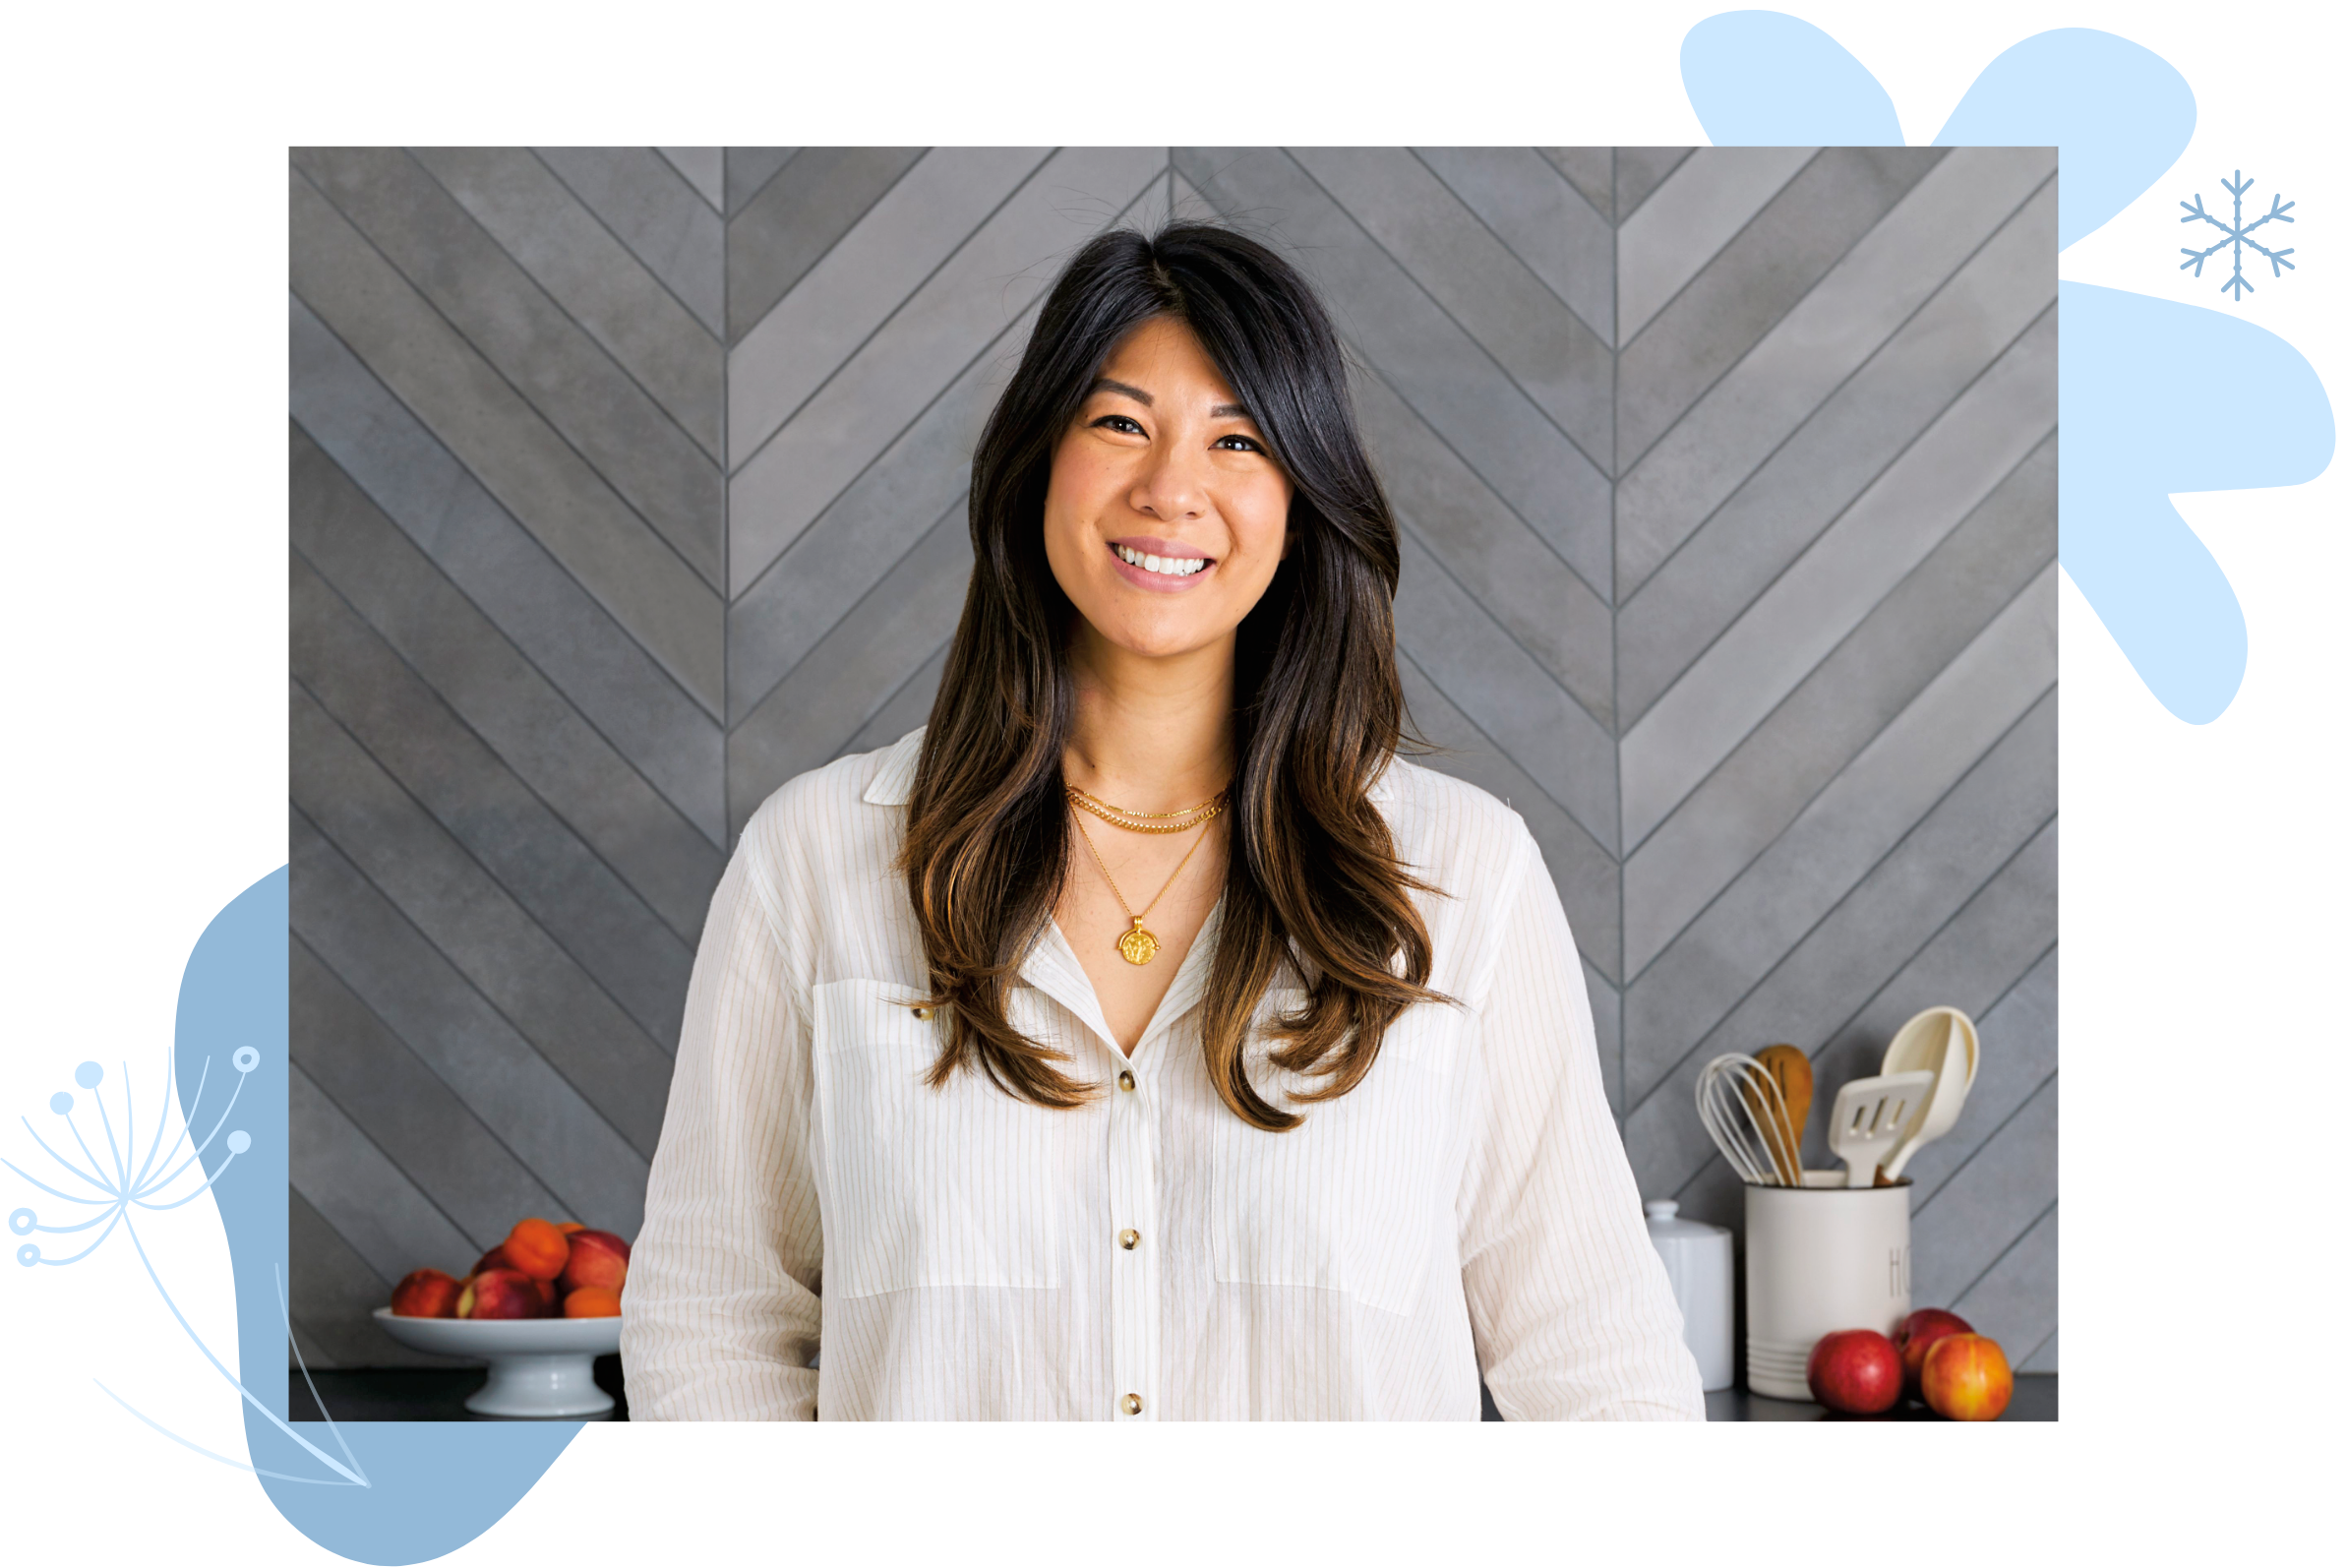 WW Food Director Sherry Rujikarn, wearing a white shirt, standing in front of a gray wall with a plate of fruit and a jar of kitchen tools.